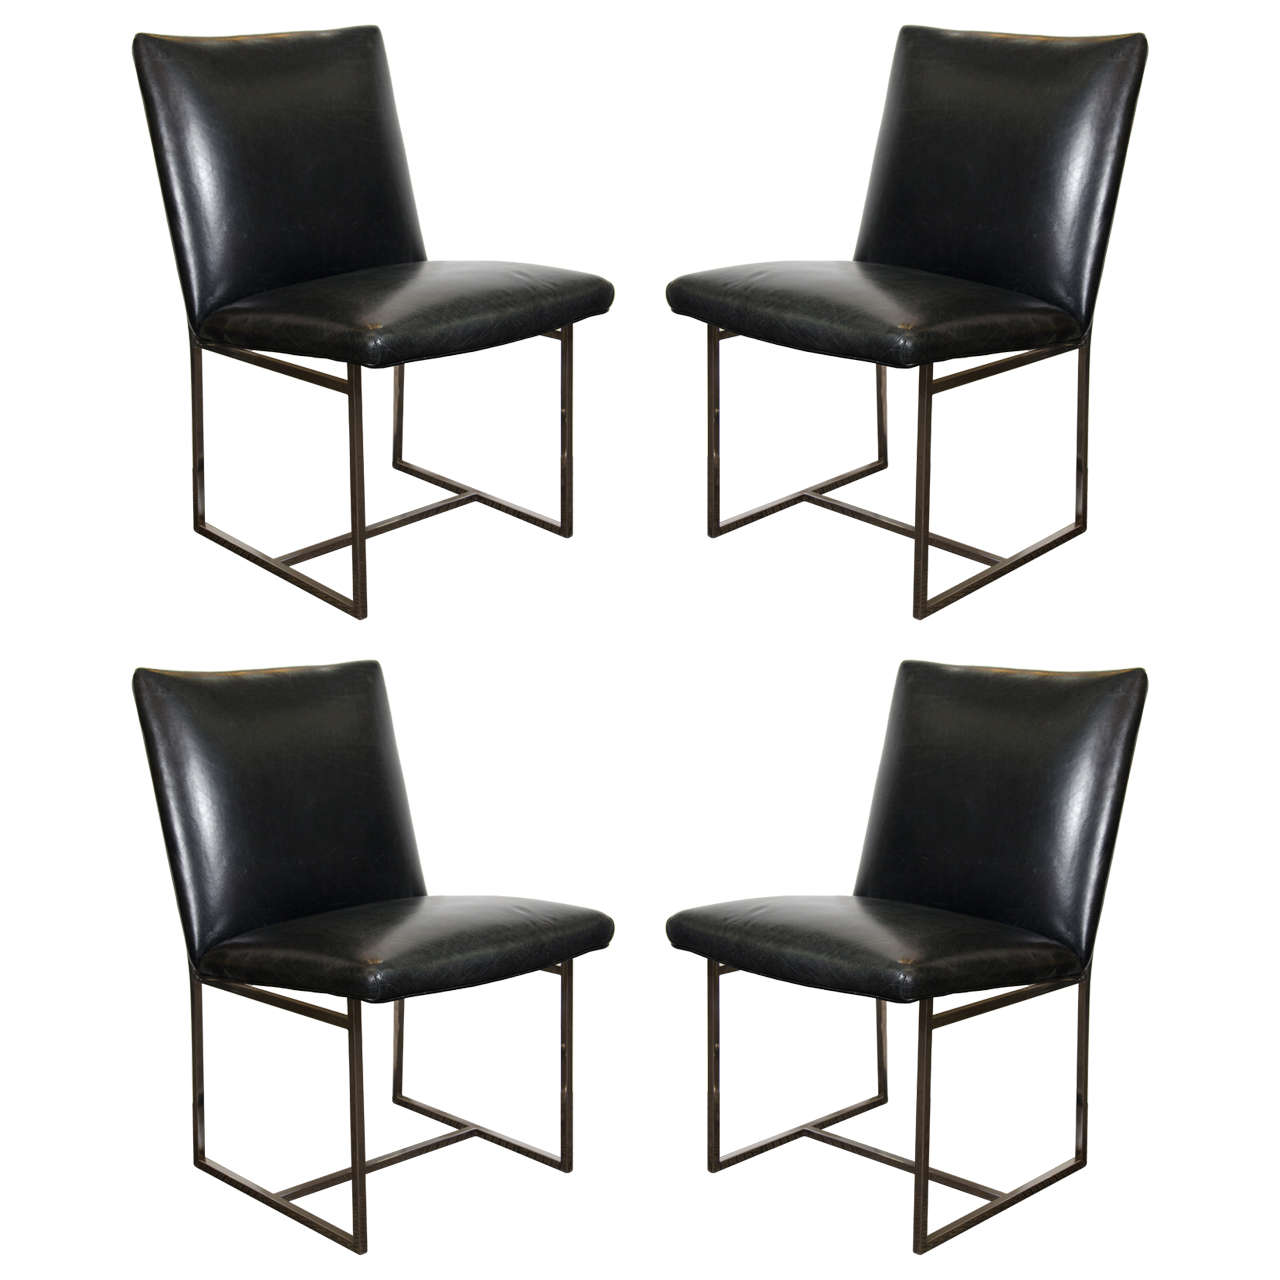 Midcentury Set of Four Milo Baughman Dining Chairs in Charcoal Leather